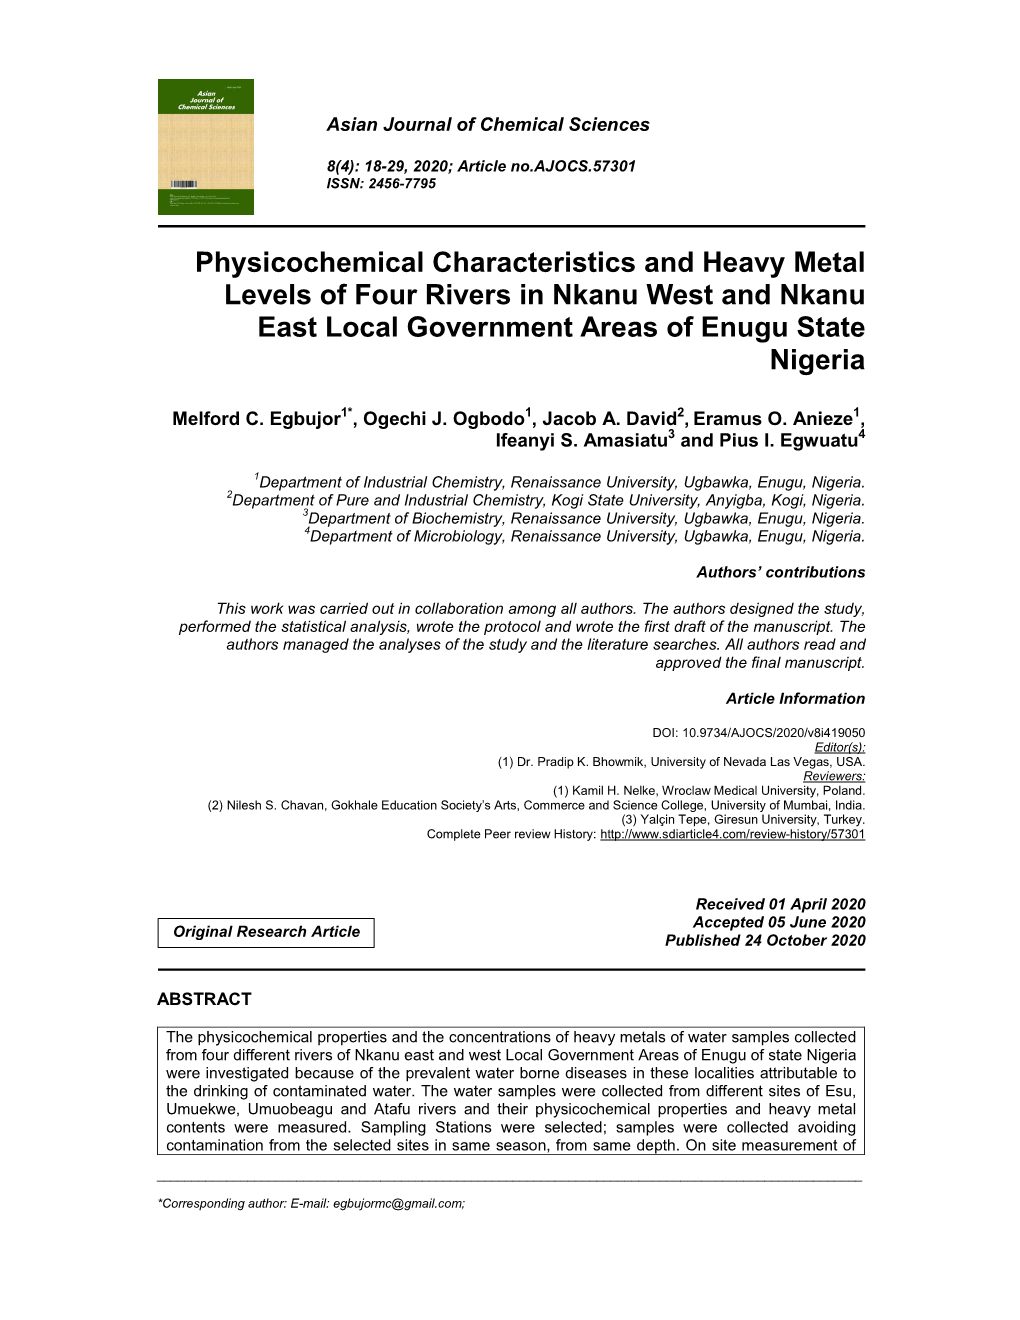 Physicochemical Characteristics and Heavy Metal Levels of Four Rivers in Nkanu West and Nkanu East Local Government Areas of Enugu State Nigeria